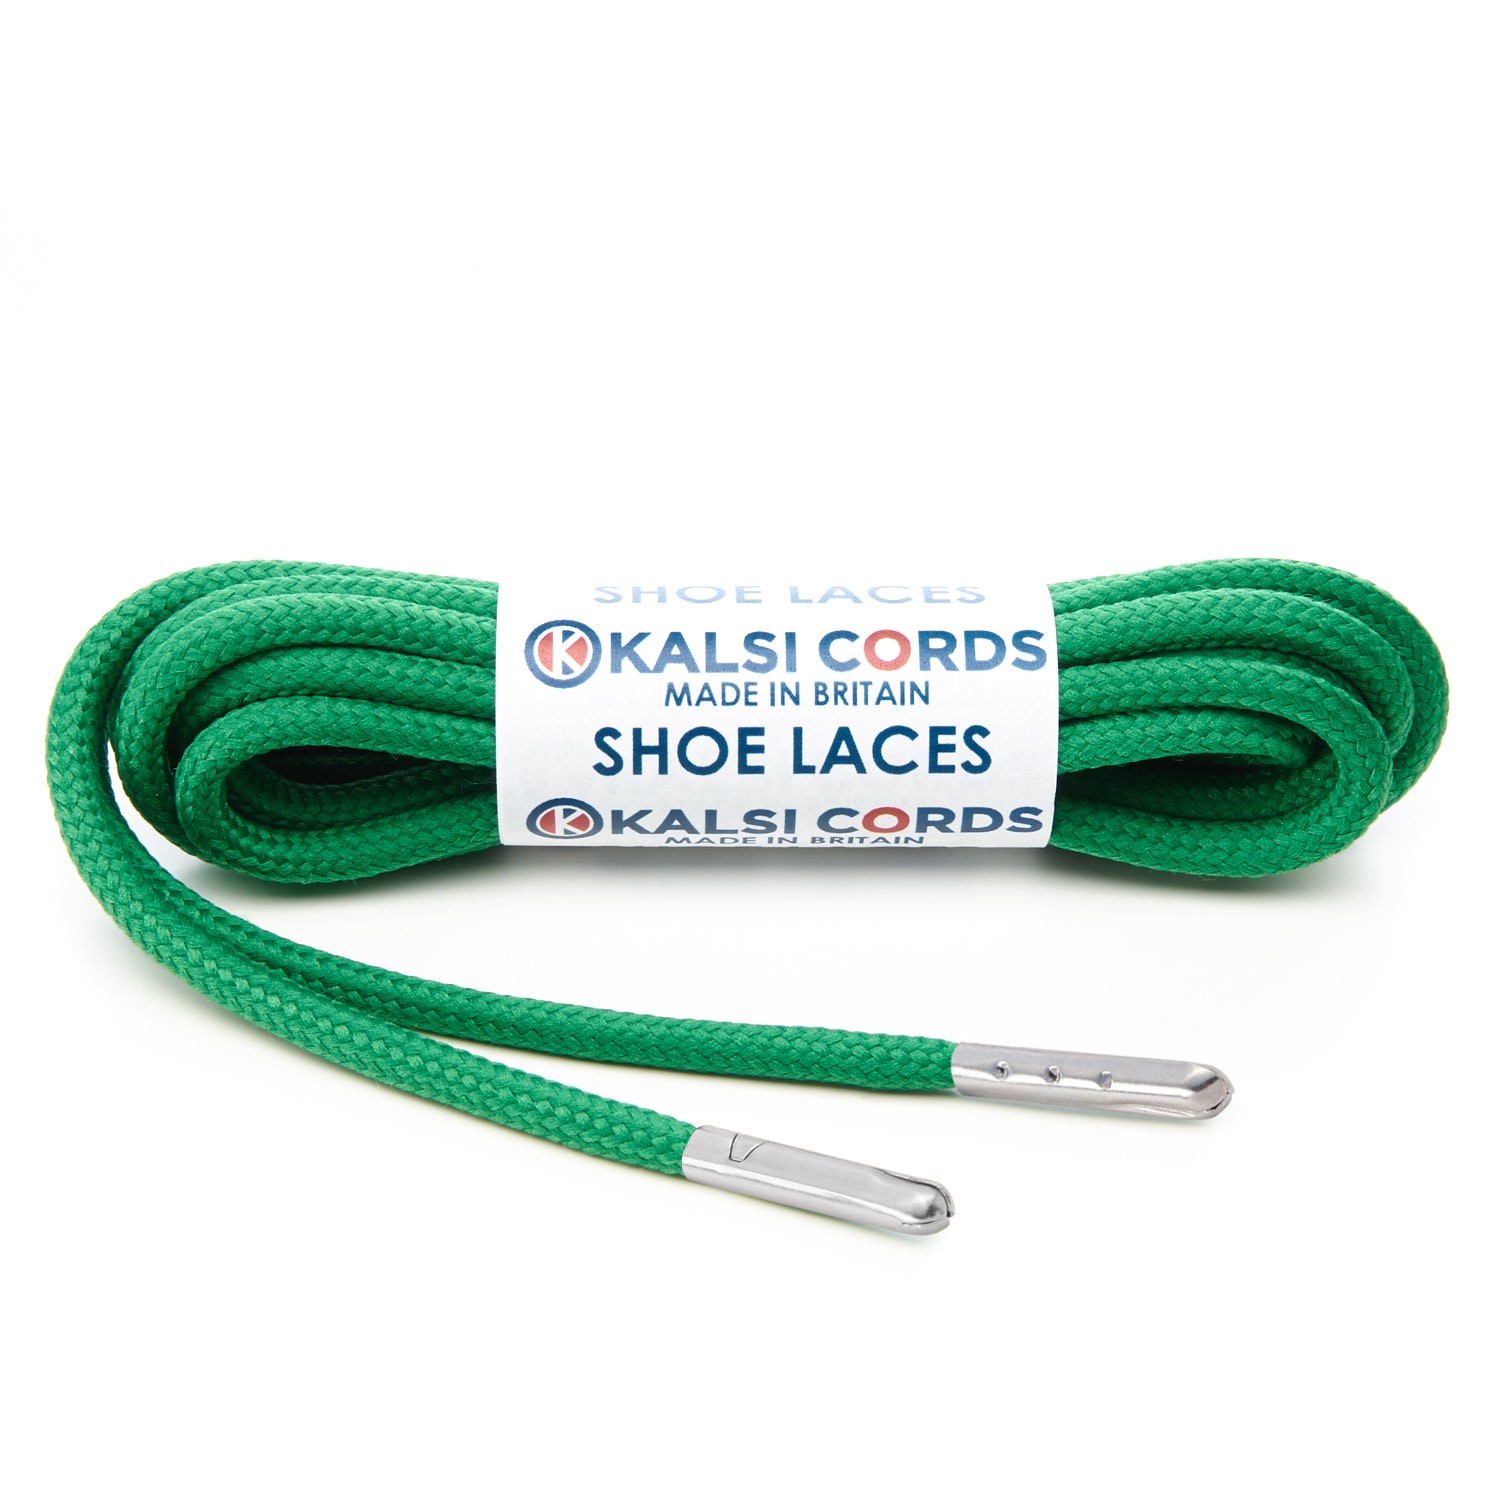 T621 5mm Round Polyester Shoe Laces Emerald Green 1 Silver Metal Tip Kalsi Cords